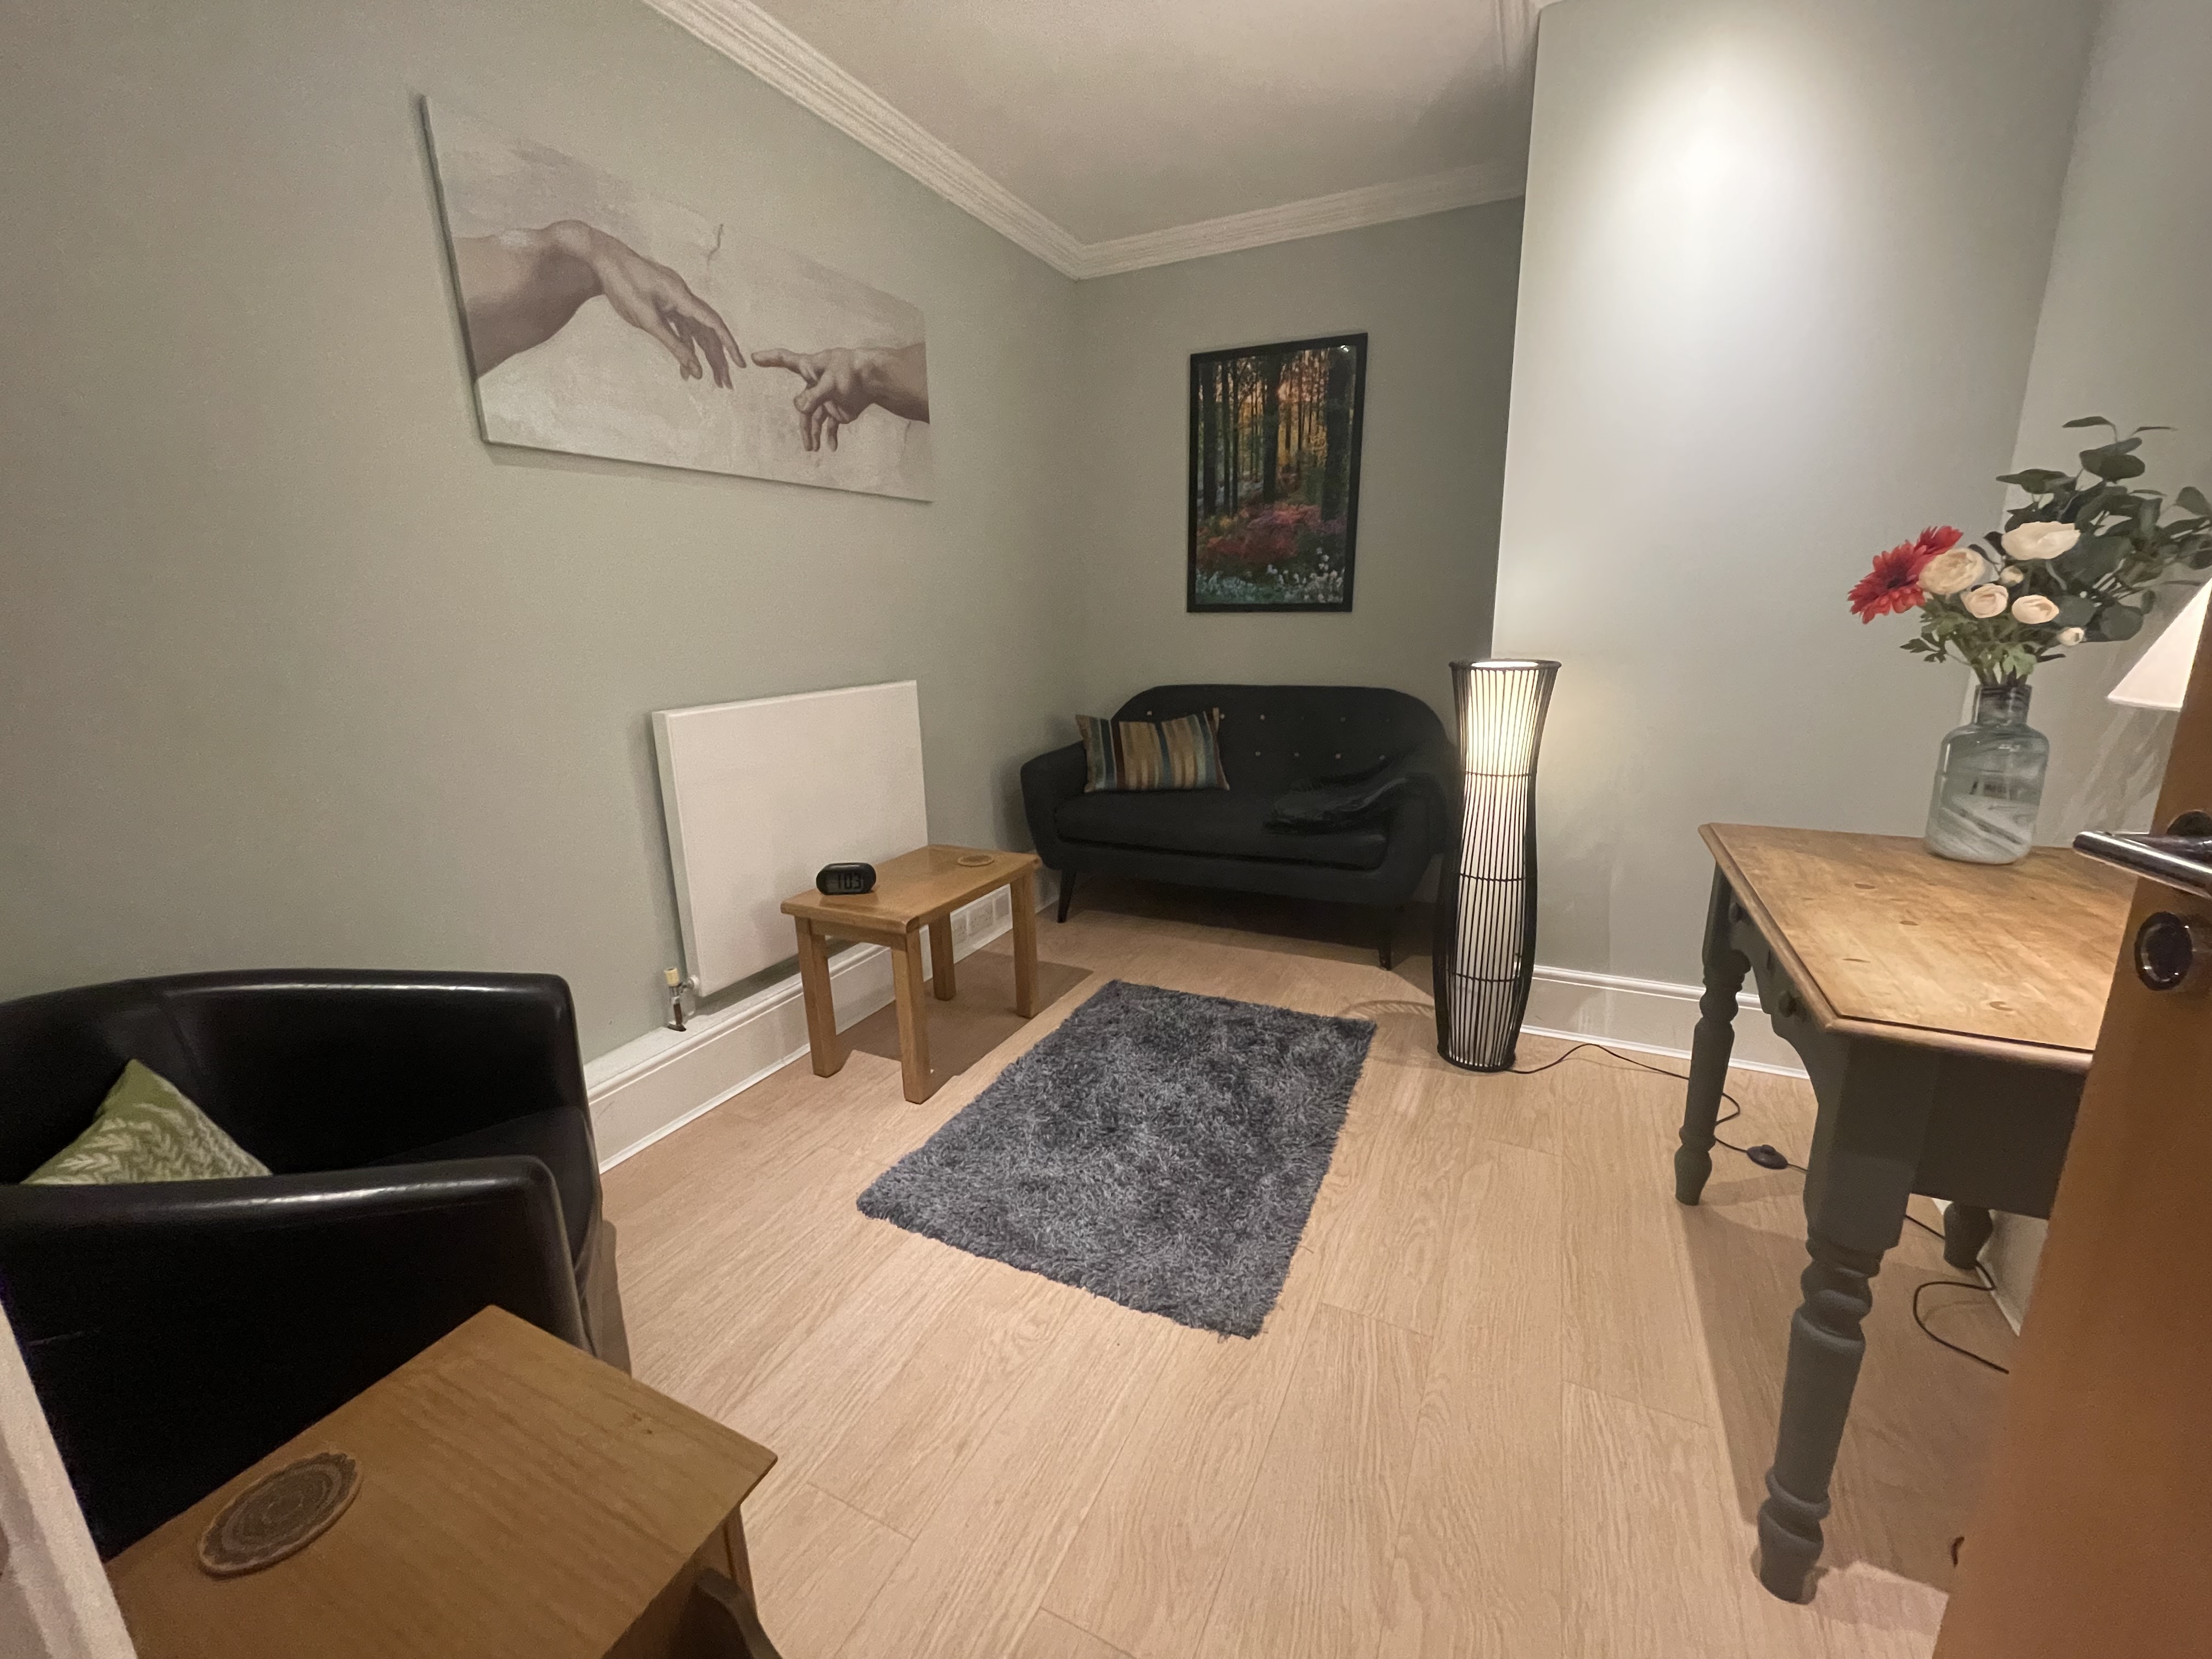 Counselling room to rent